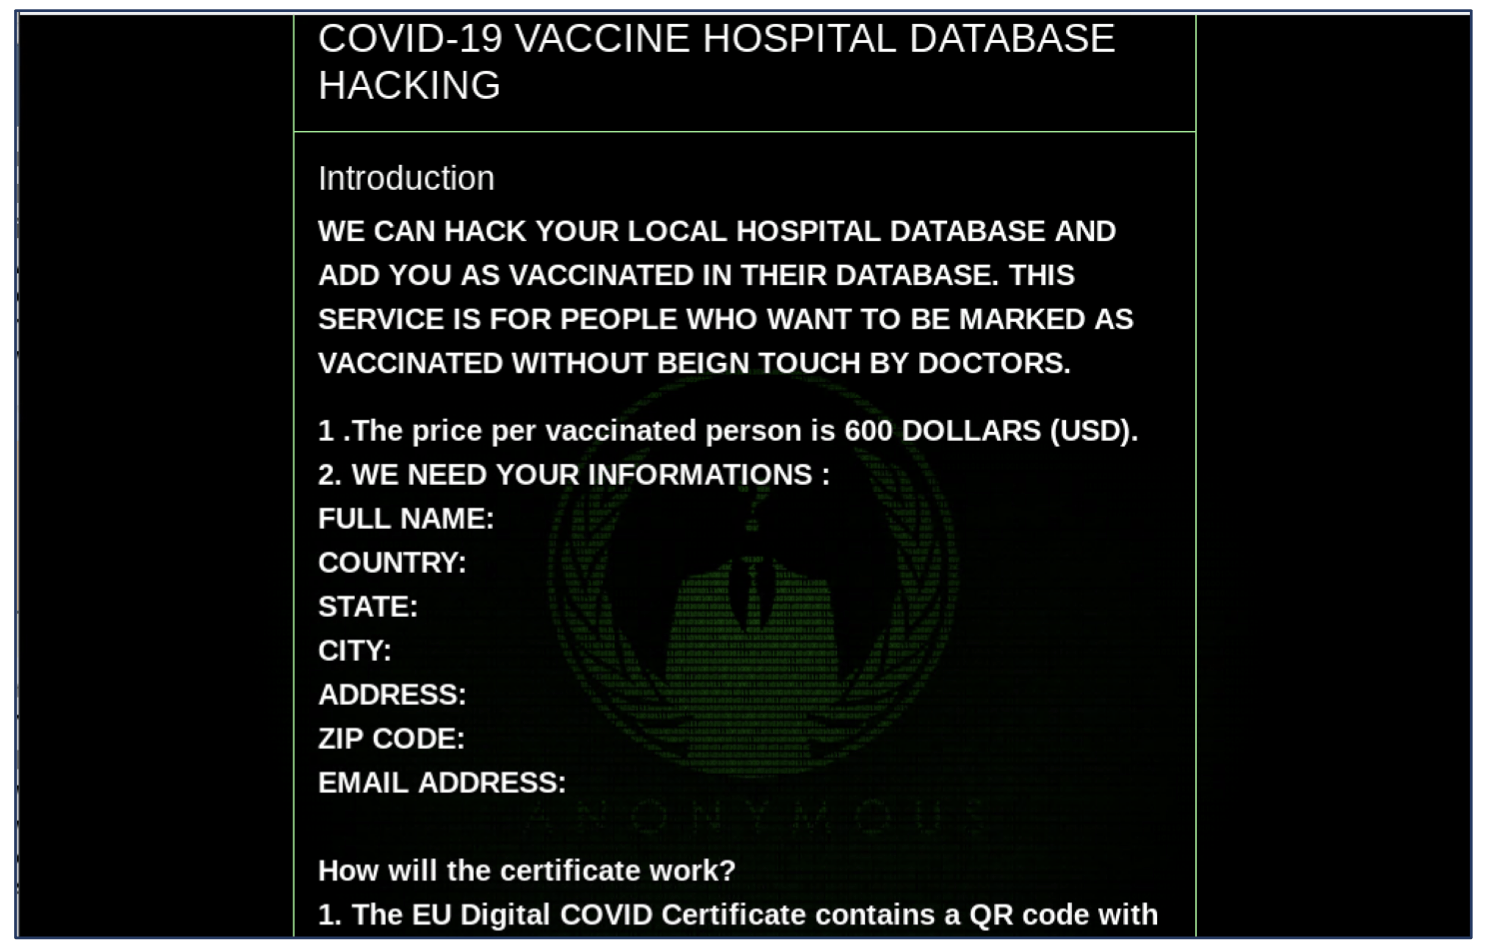 COVID-19 Vaccine Hospital Database Hacking from Tor